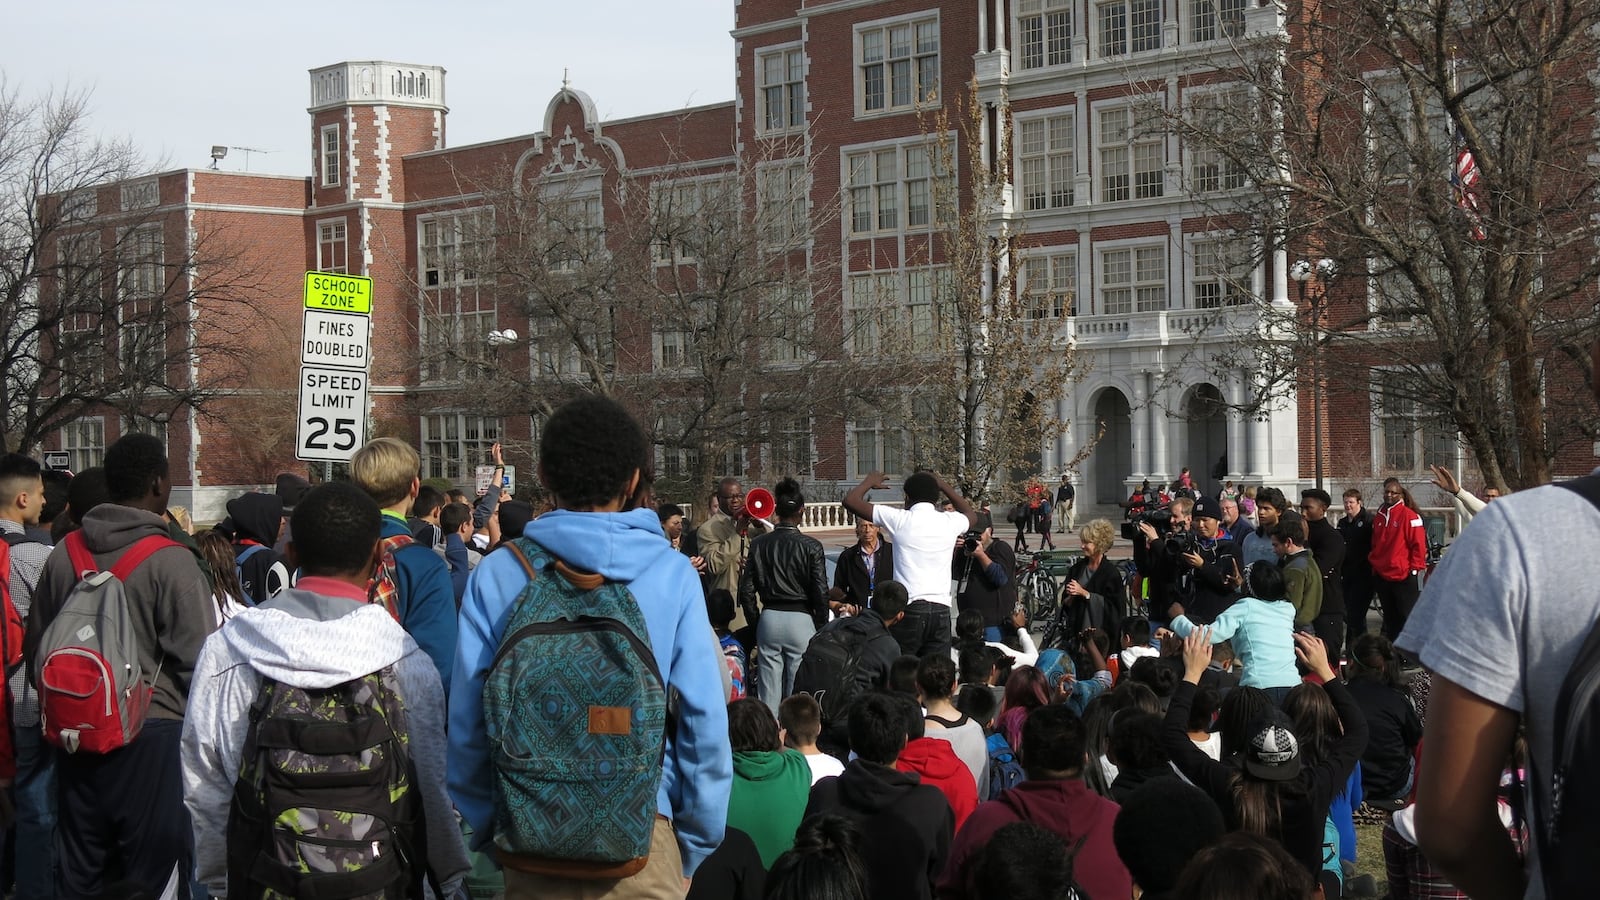 Students from South High School arrive at East High School during student protests in Dec. 2014.